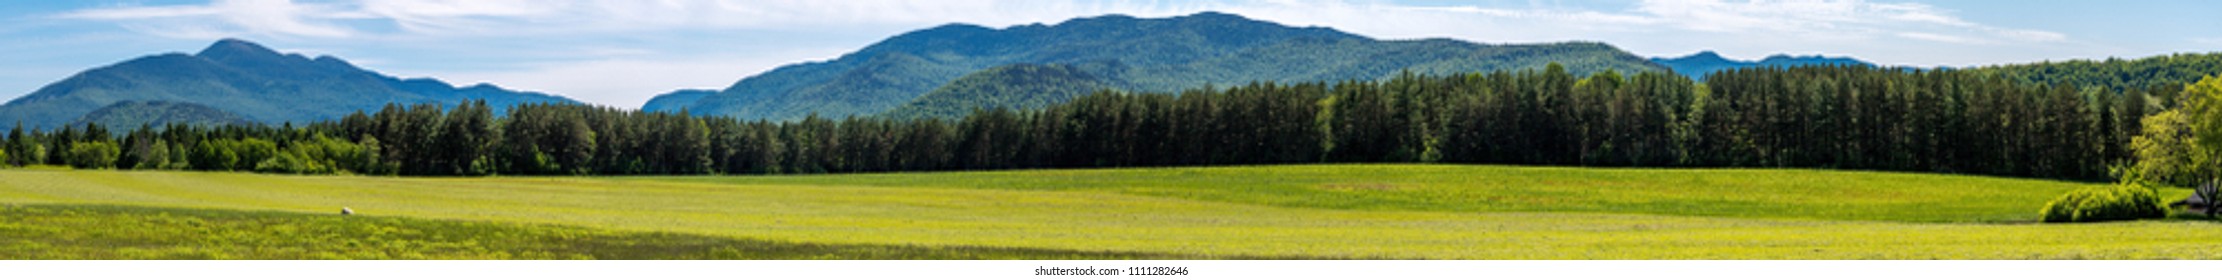 Panoramic view of a glade within a forest in the Adirondacks Mountains 